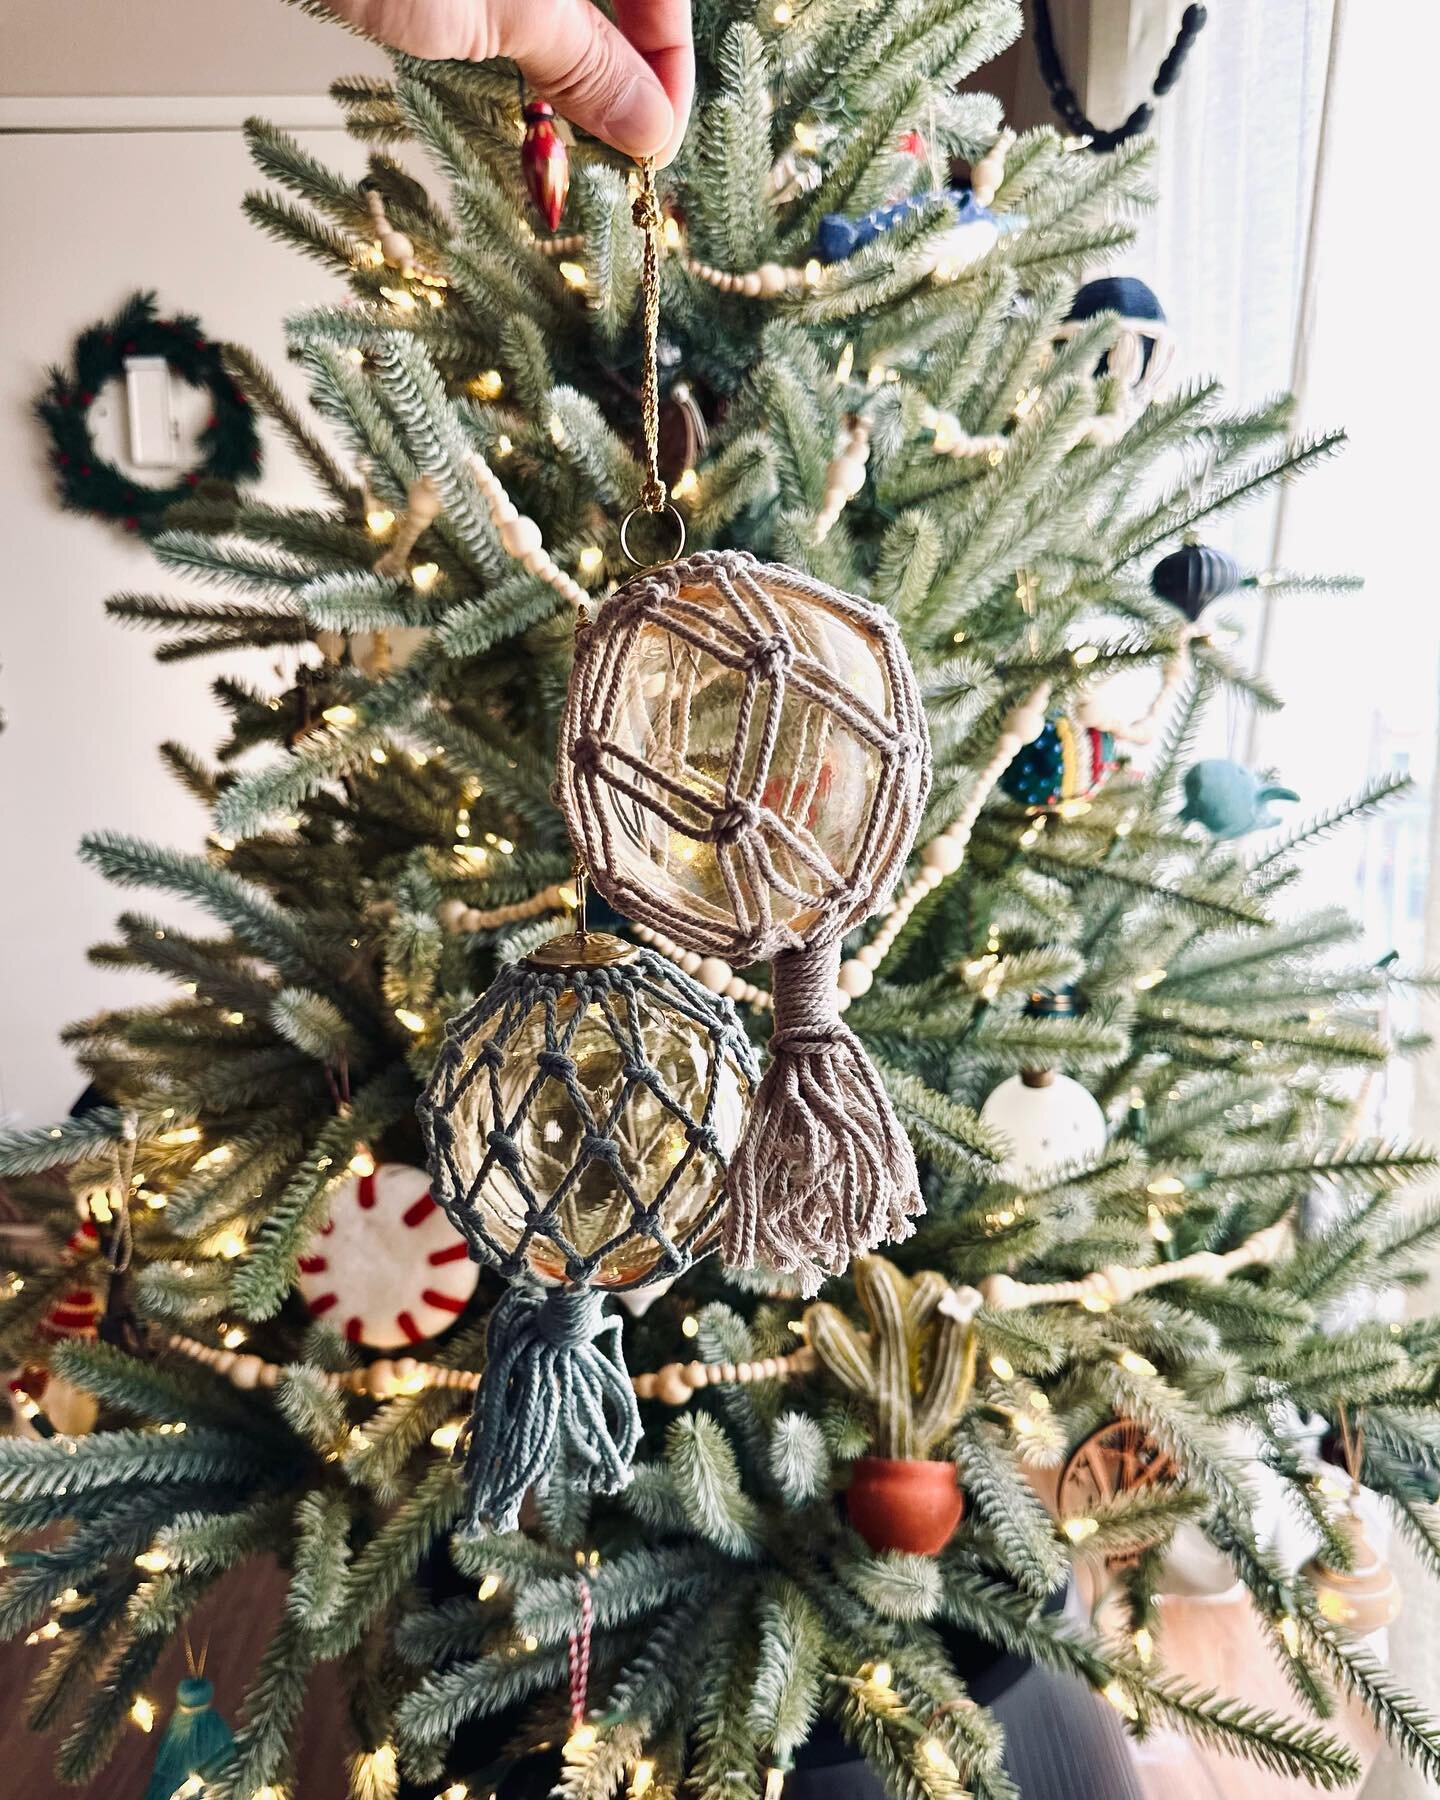 New fishing float tiki ornaments! A perfect addition to our Christmas tree for this #Huladay season! #TikiTings 🎄🏮🐟